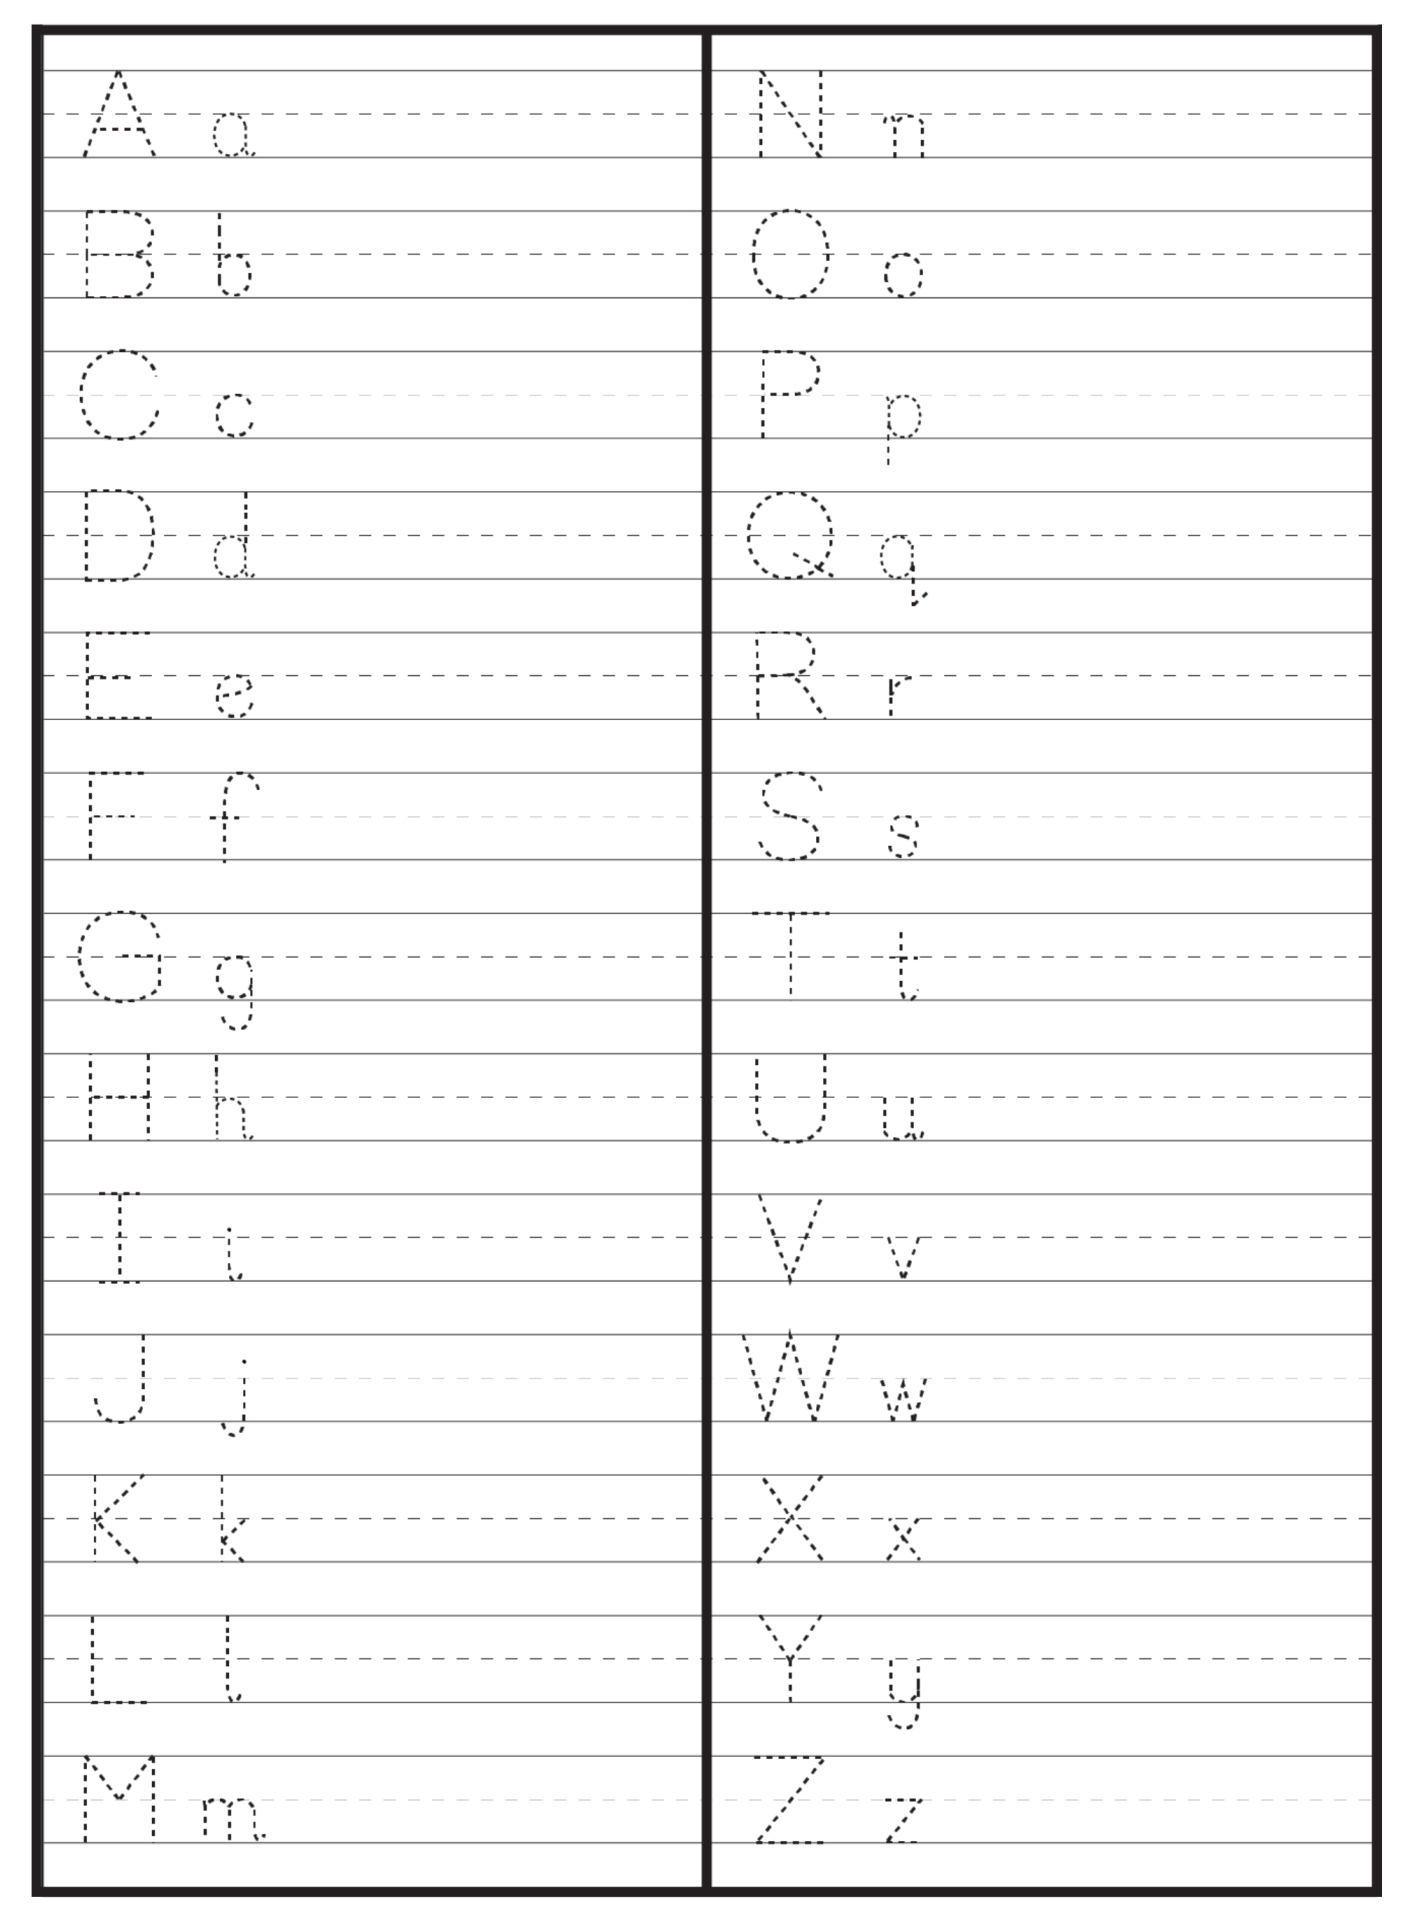 tracing-lowercase-letters-free-printable-printable-world-holiday